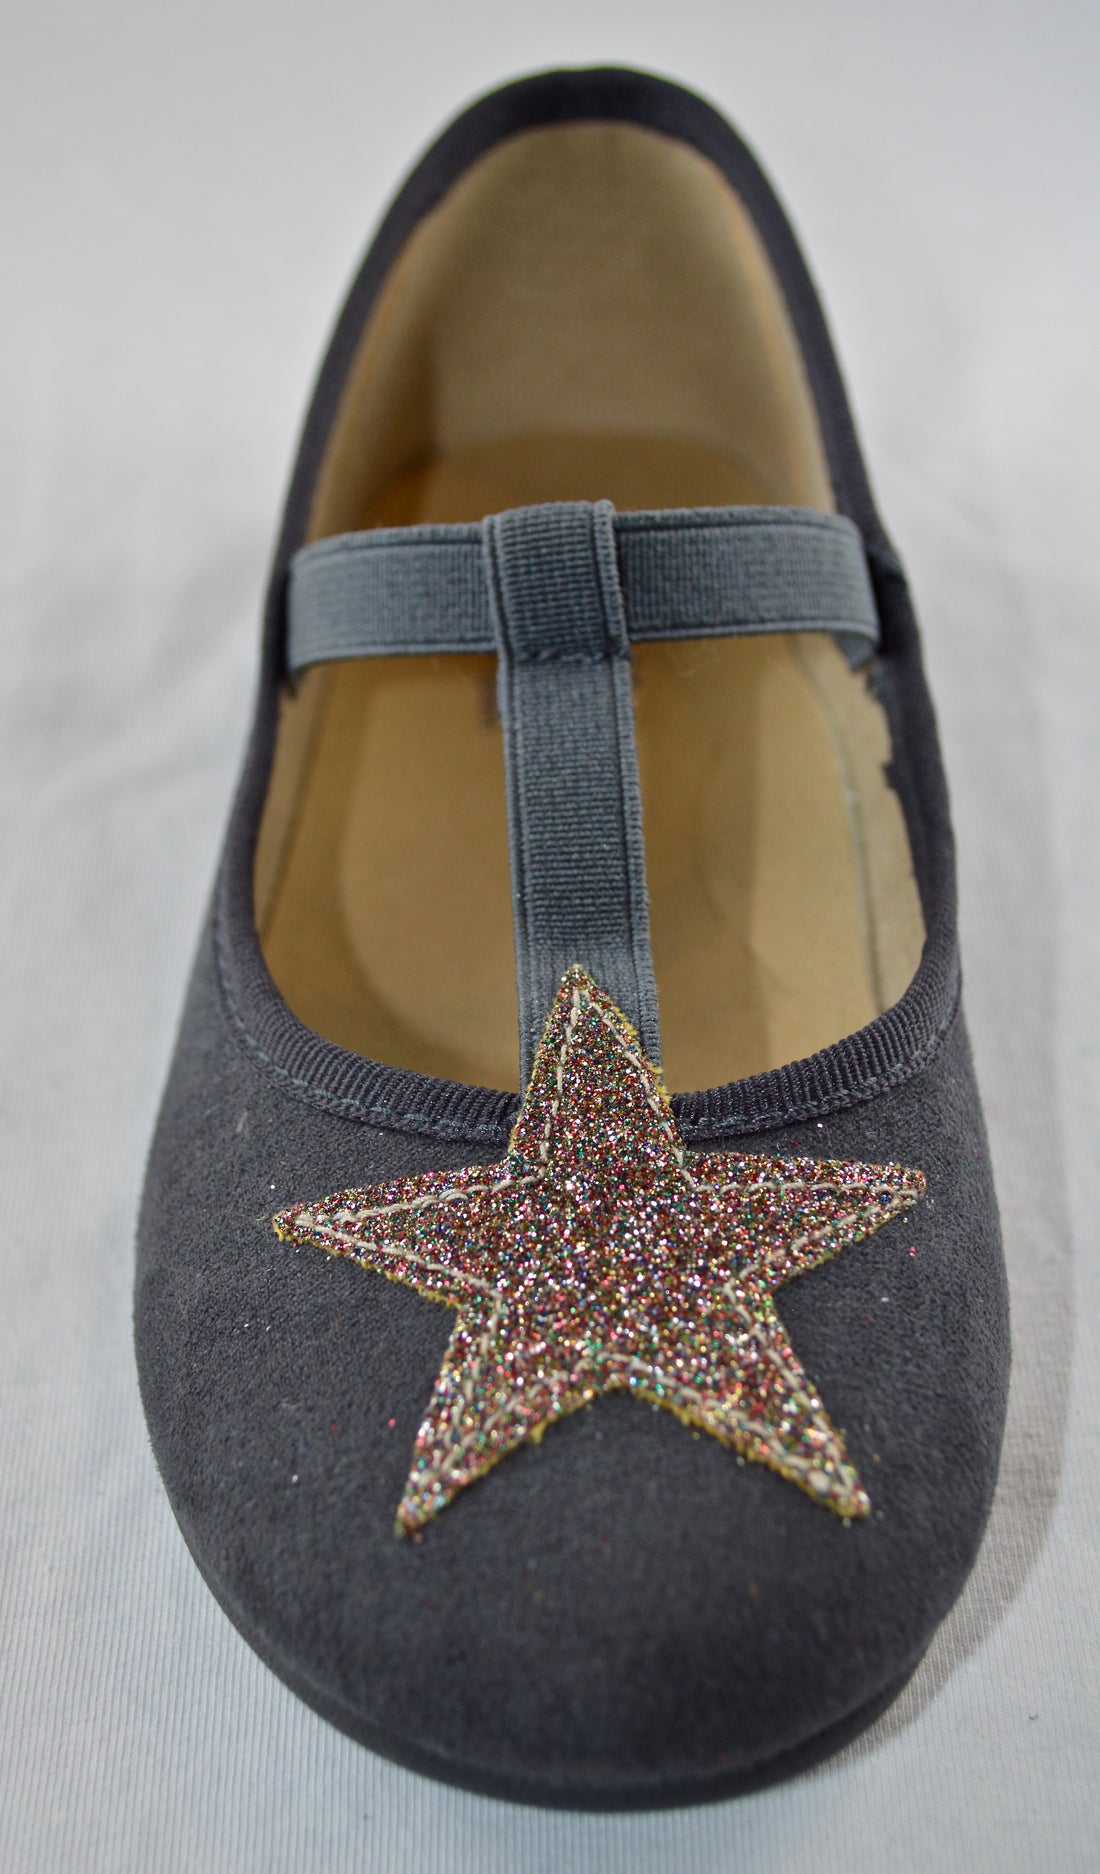 BATILAS ballet flats in blue or gray leather with star